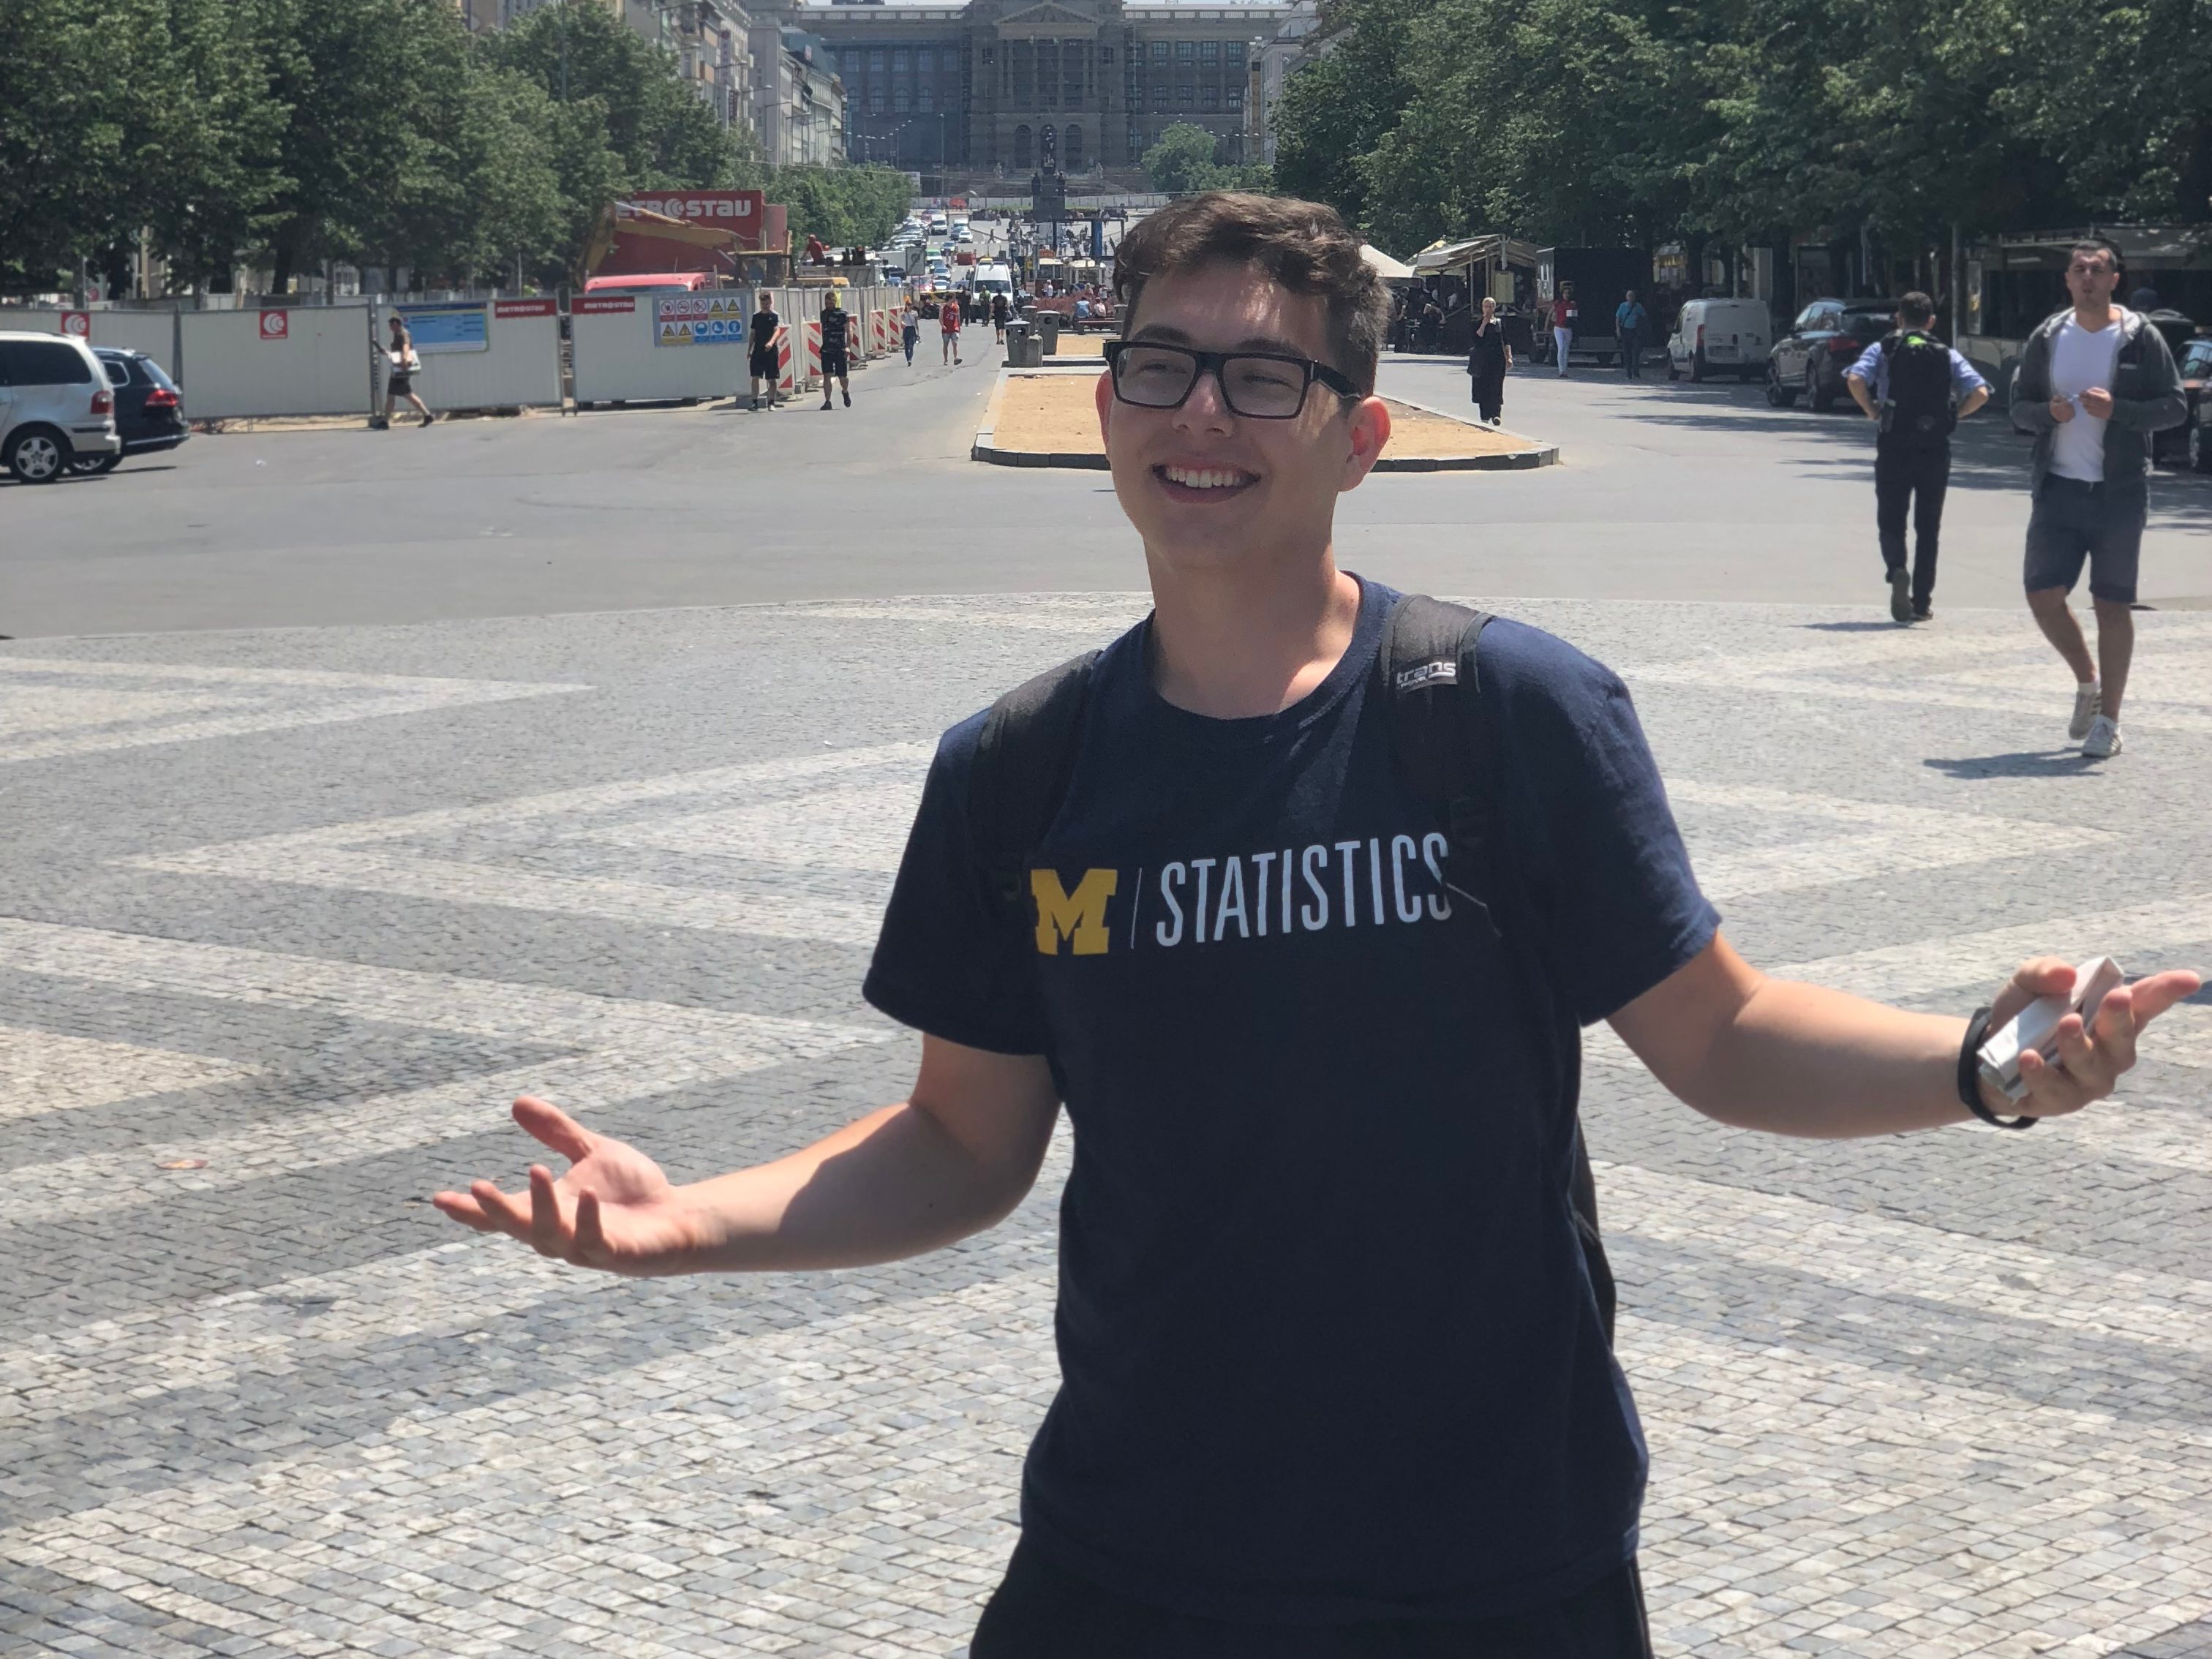 A student with his arms outstretched, grinning, stands in the center of a plaza wearing a University of Michigan Statistics shirt.